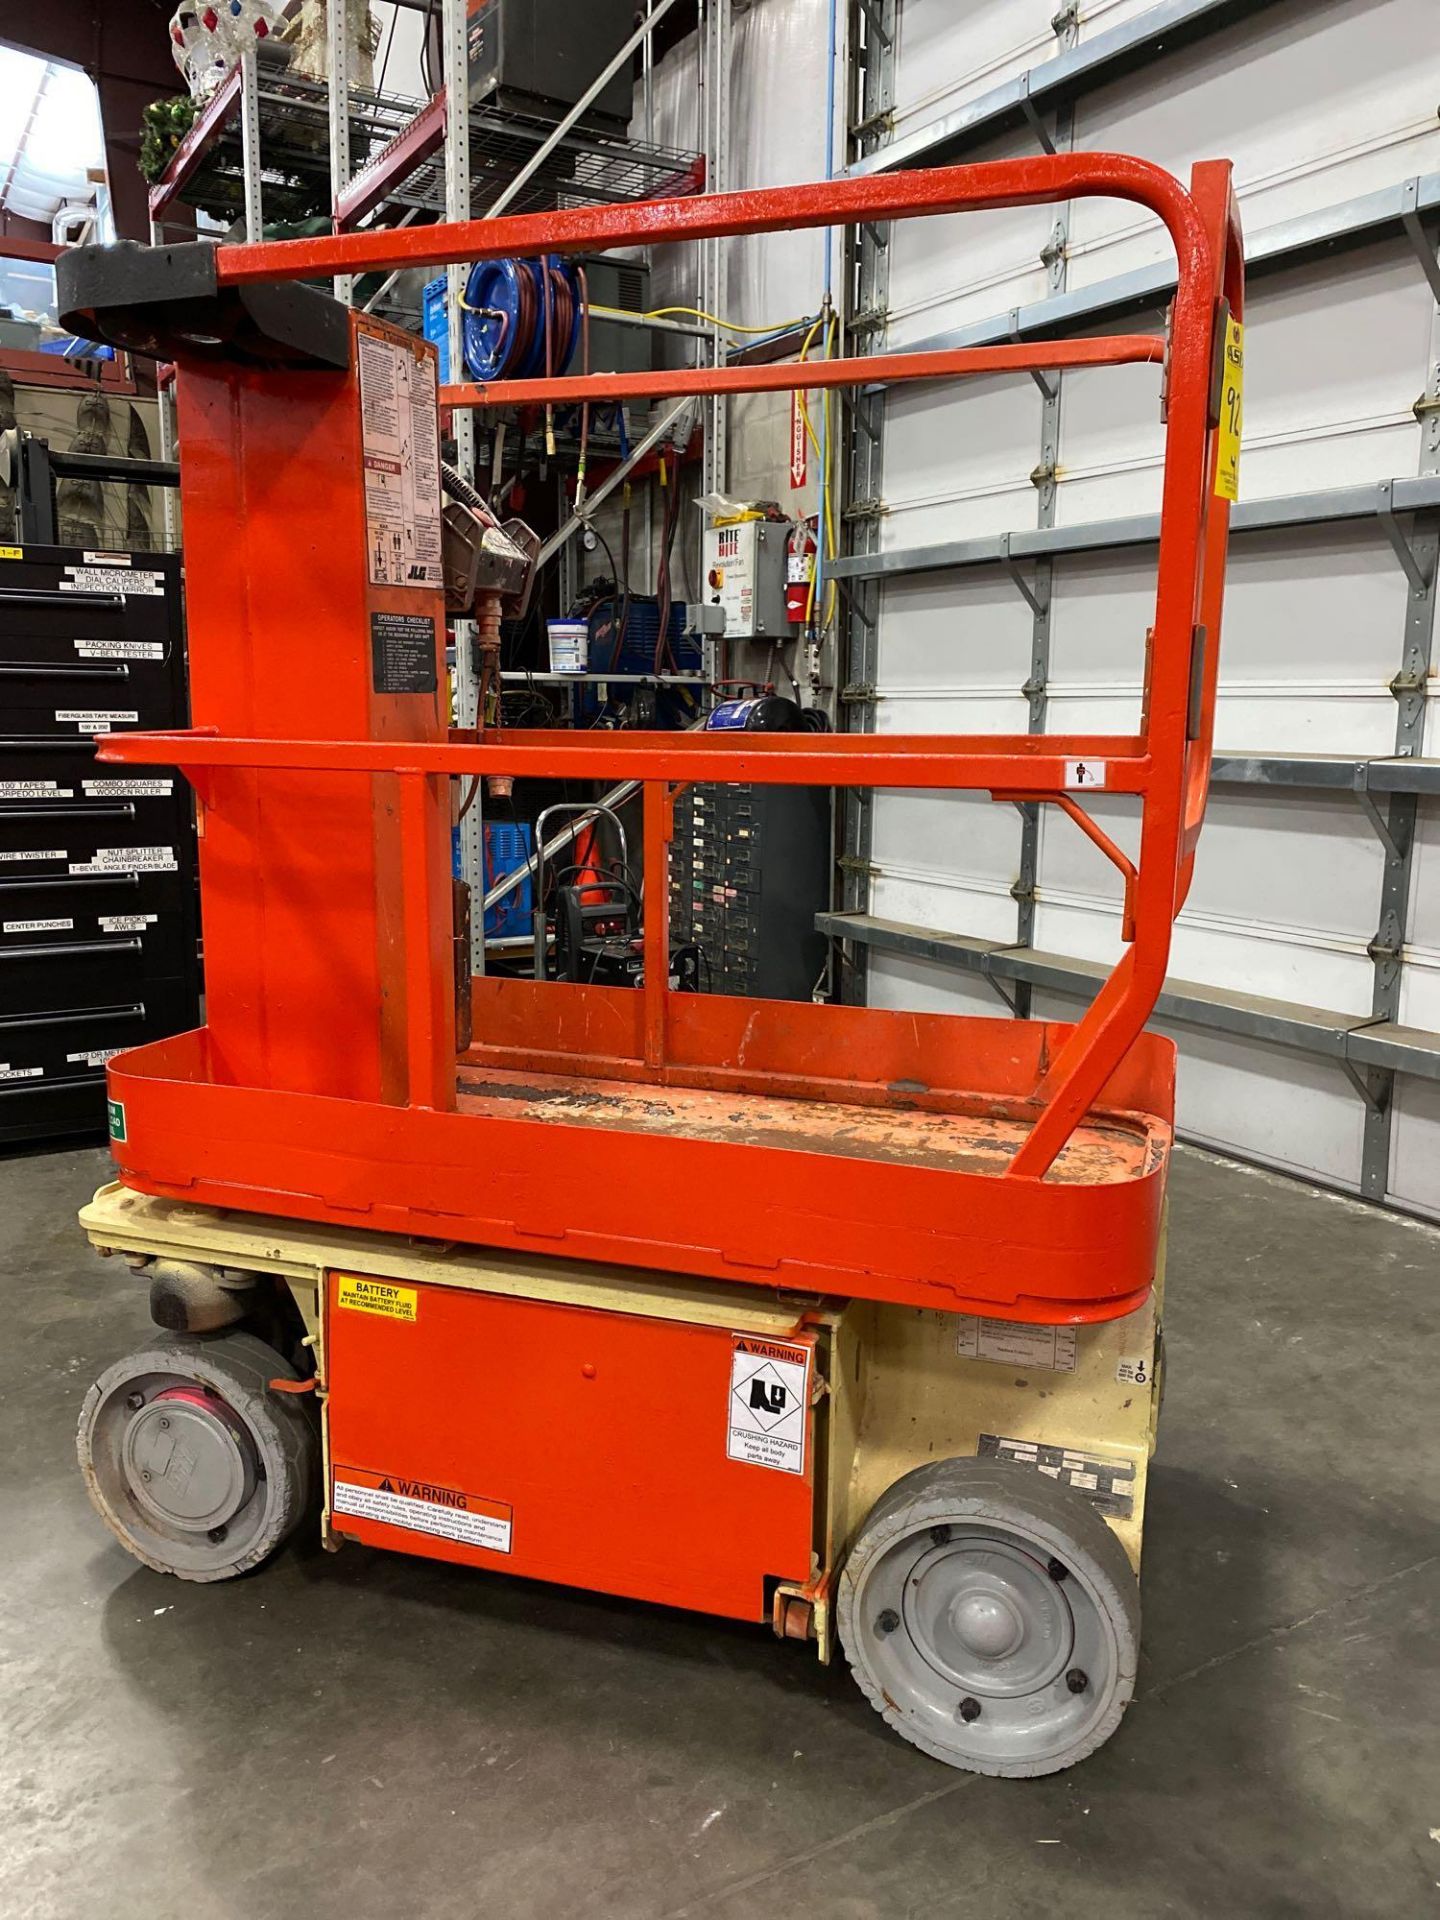 JLG 1230 ES ELECTRIC MAN LIFT, SELF PROPELLED, BUILT IN BATTERY CHARGER, 12' PLATFORM HEIGHT, APPROX